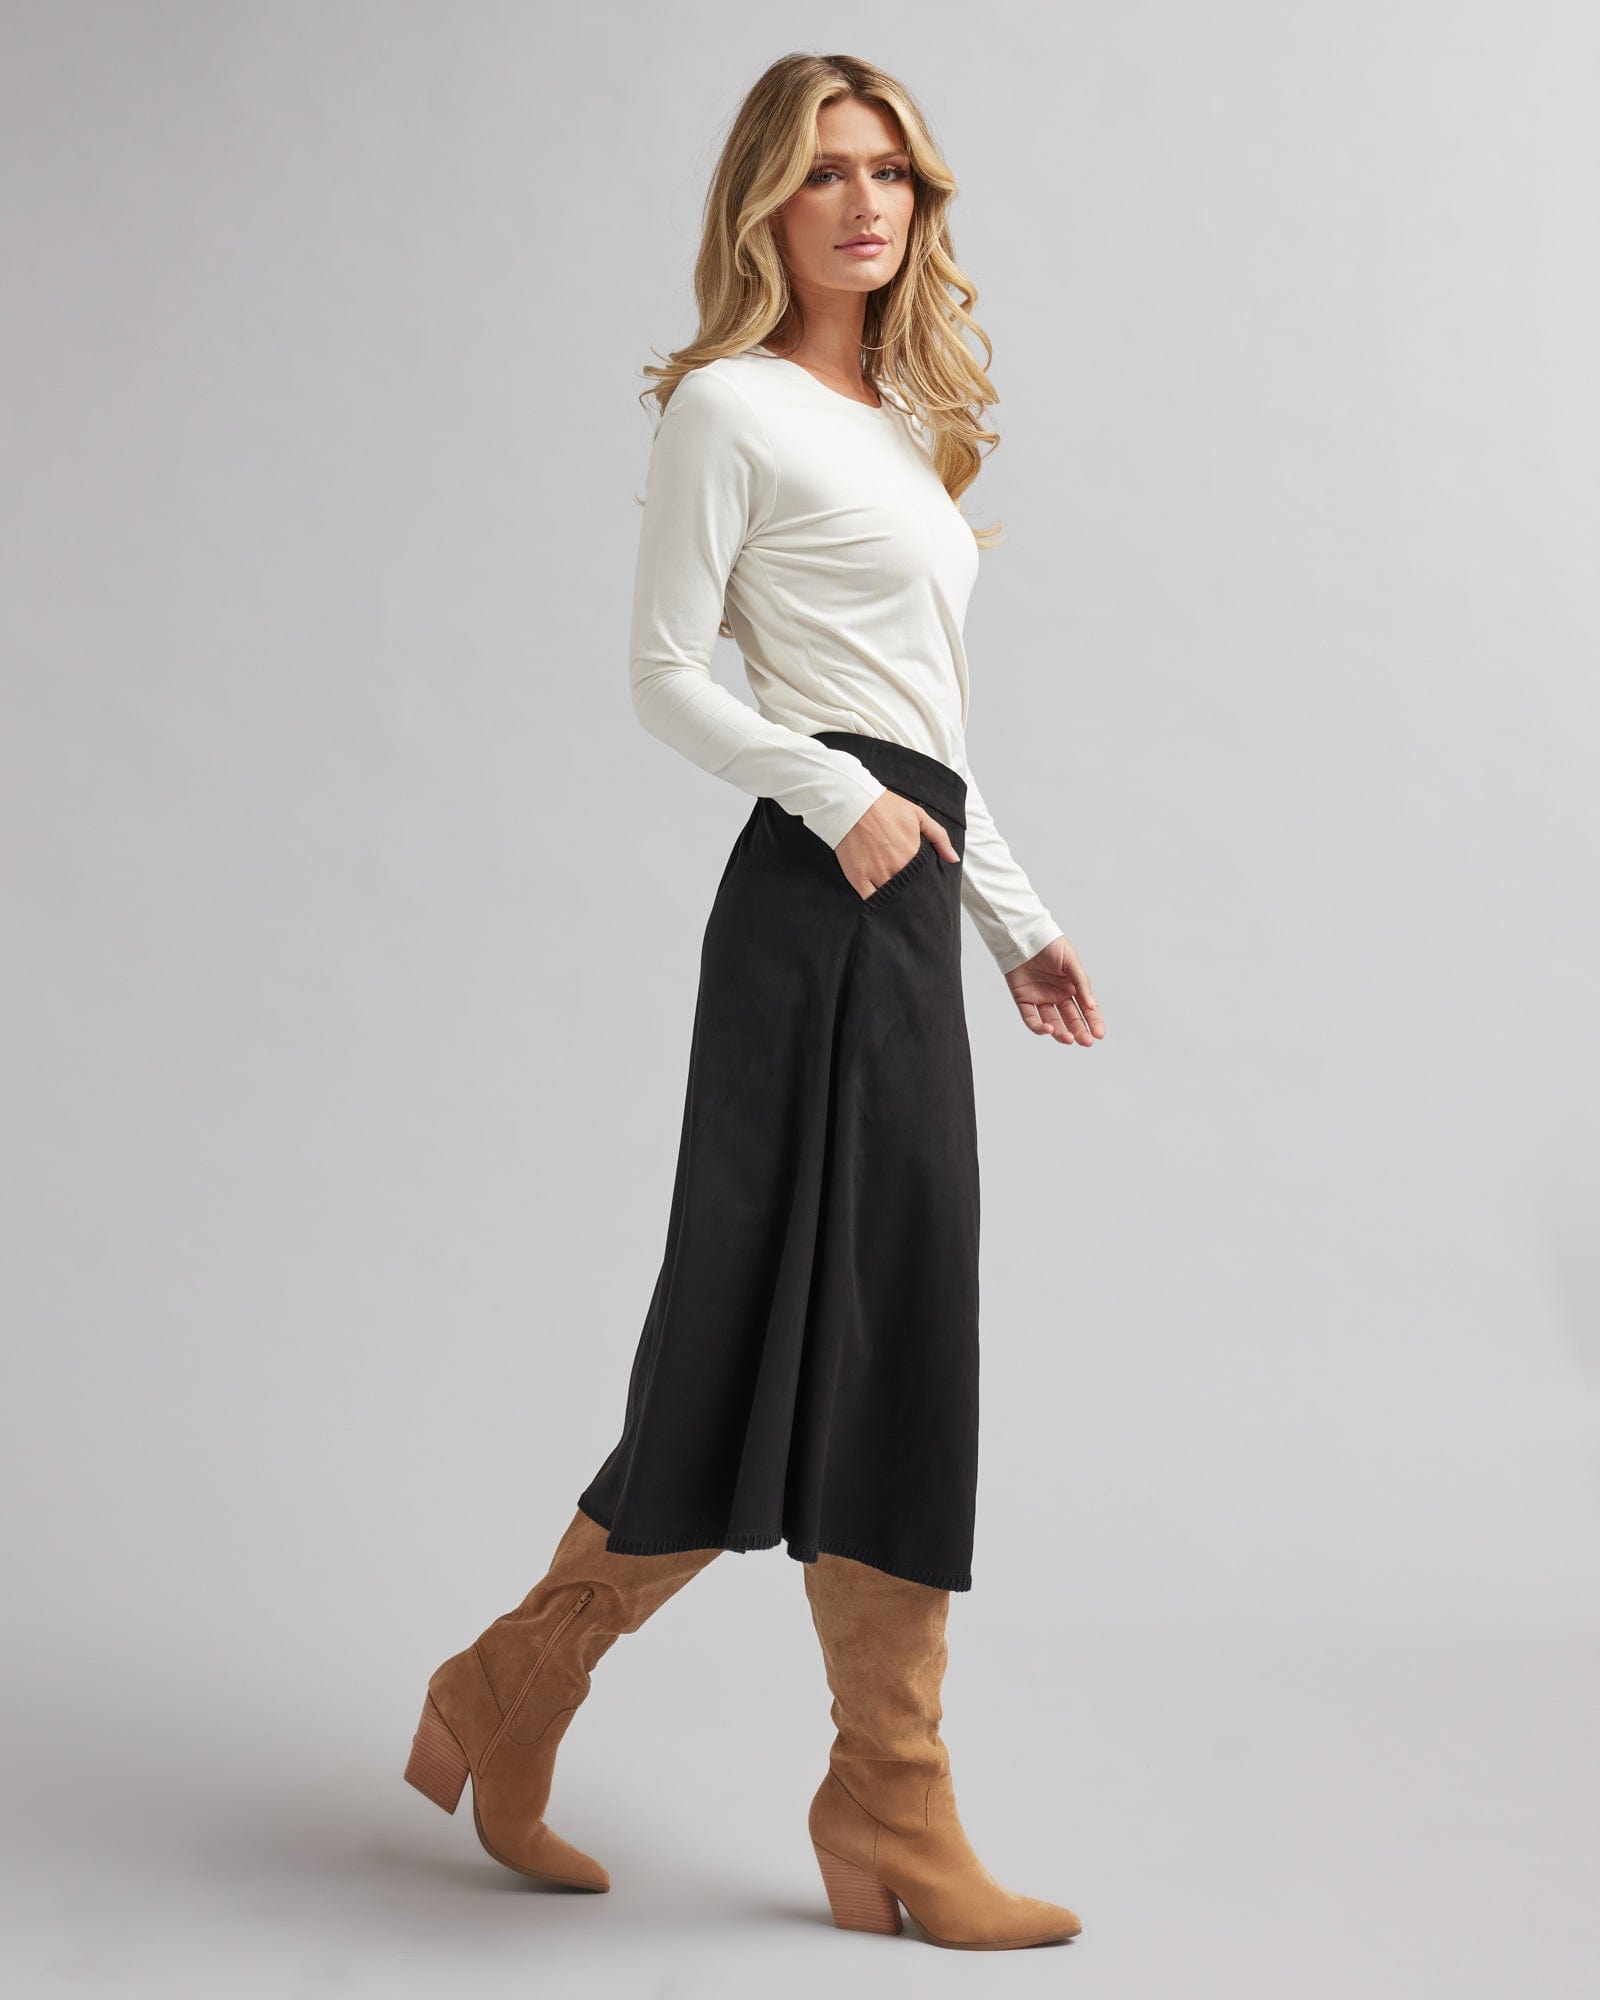 Woman in a black, midi-length, suede skirt